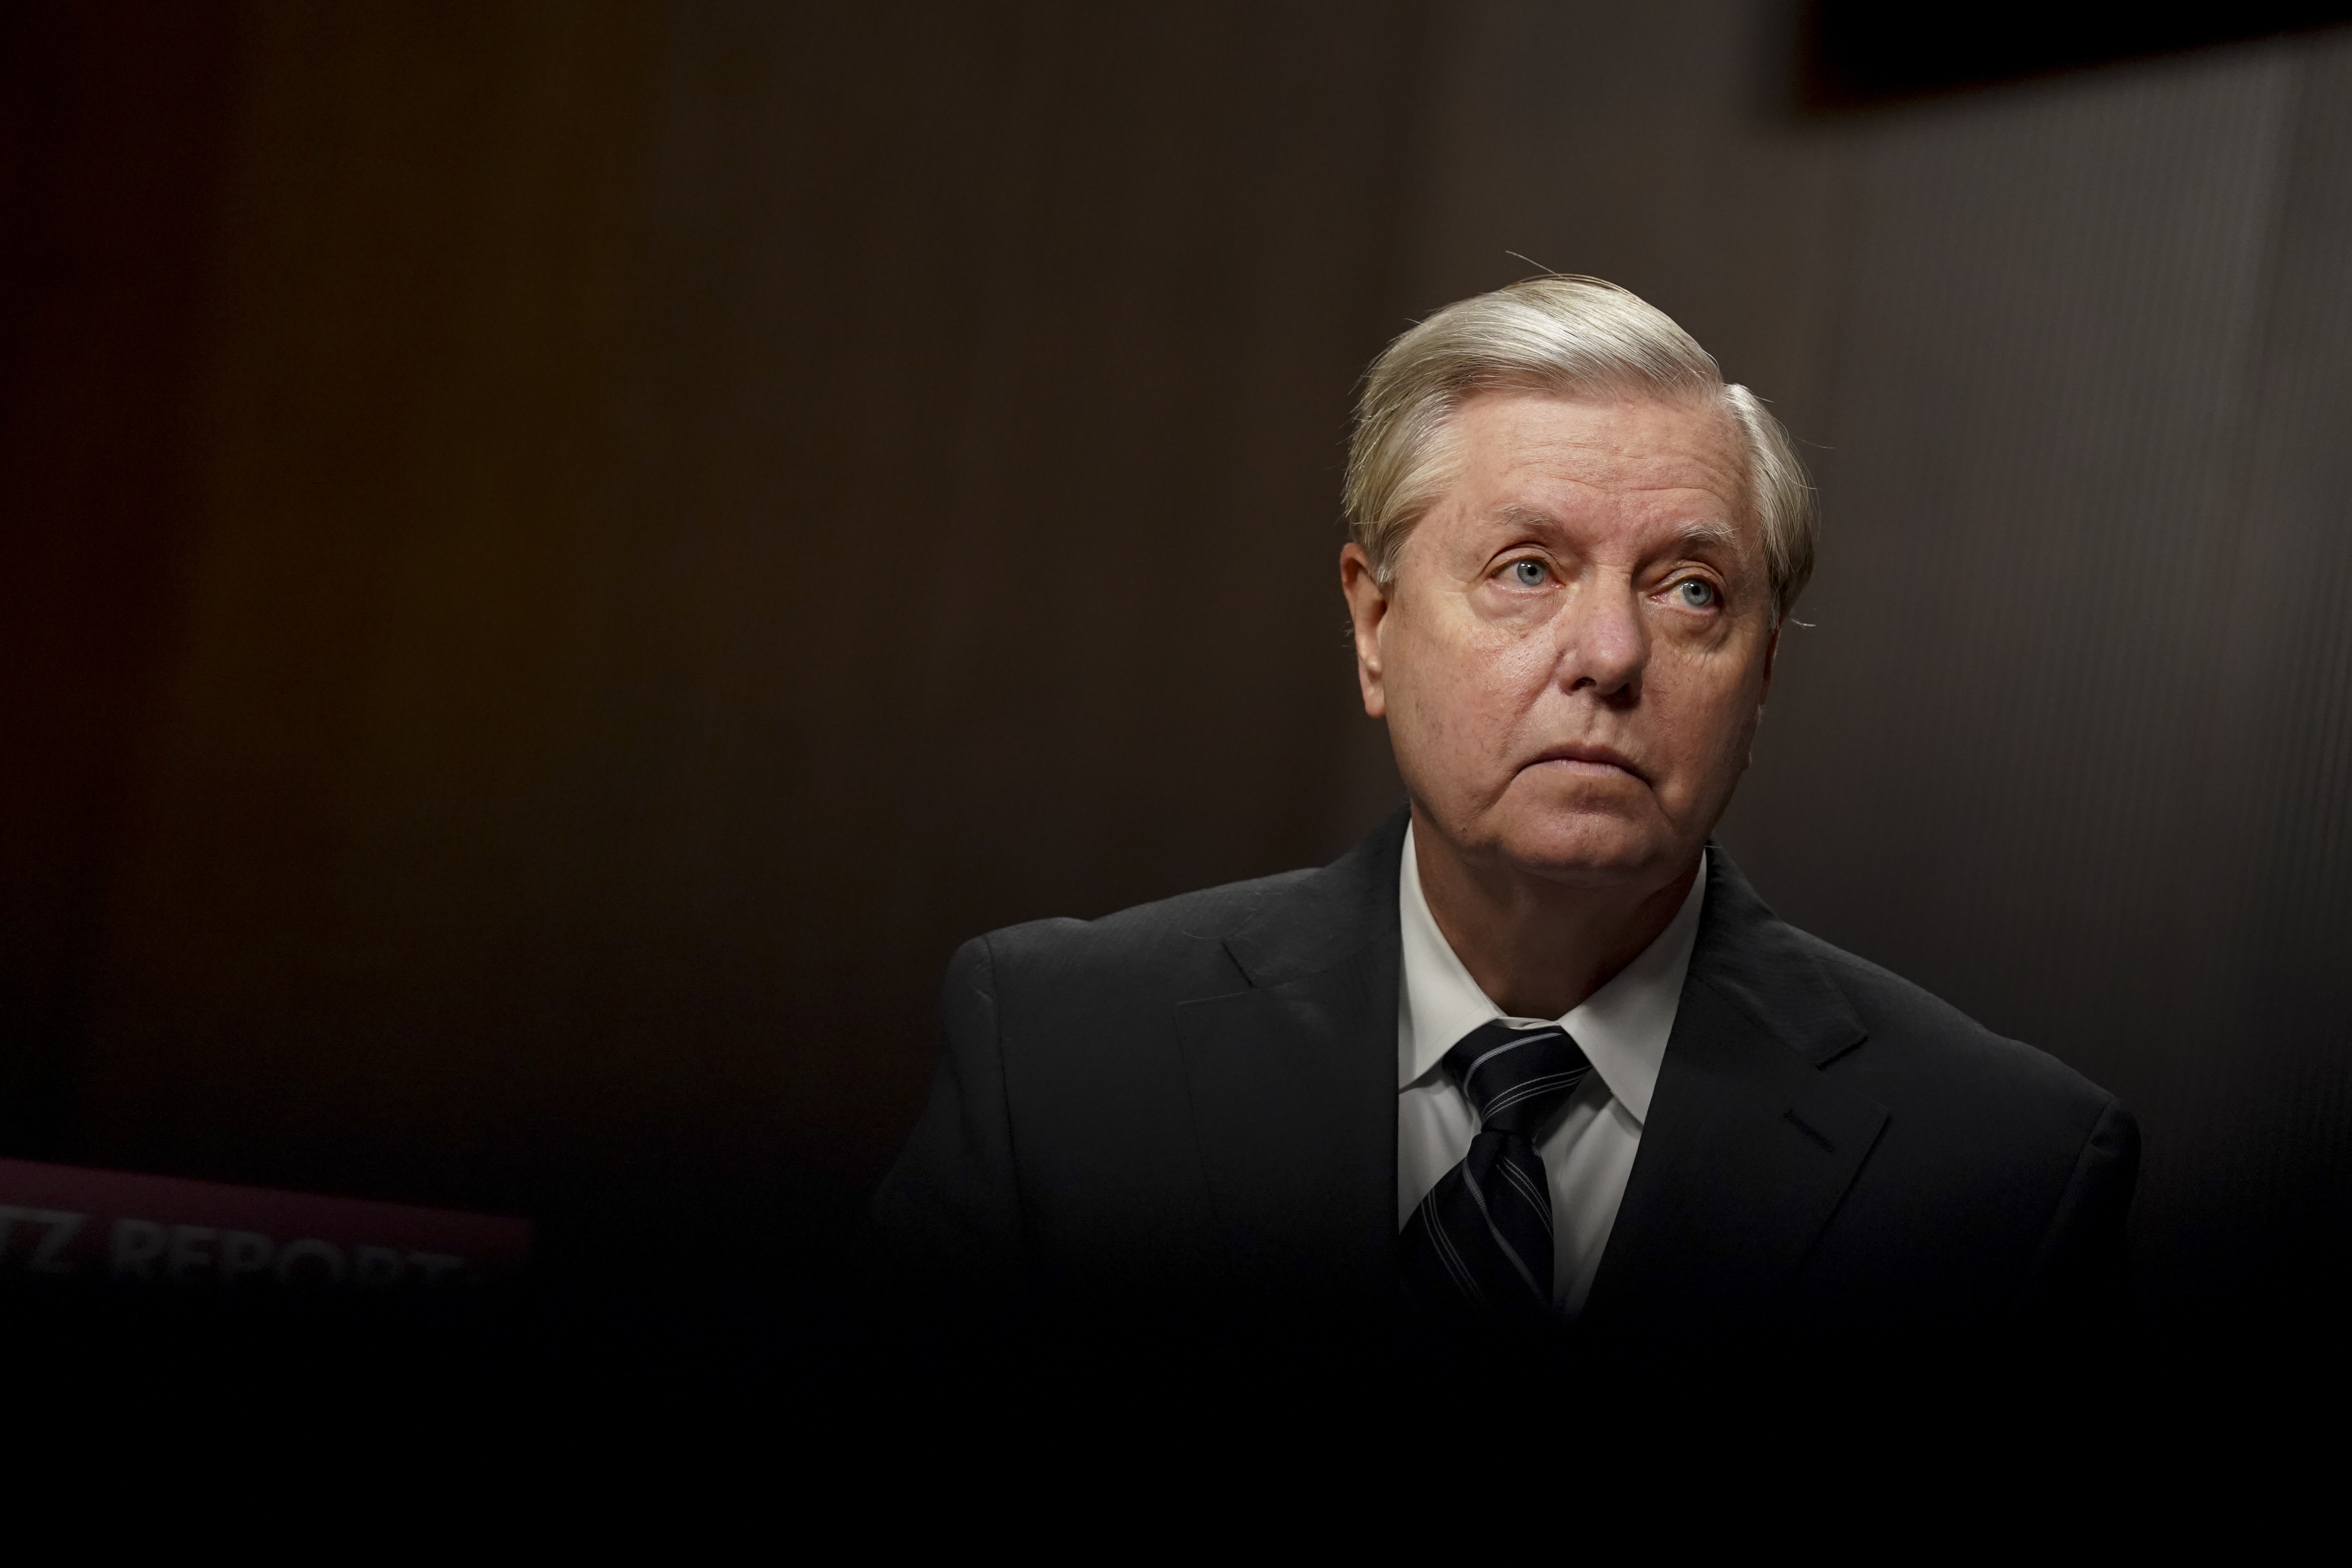 WASHINGTON, DC - SEPTEMBER 30: Chairman of the Senate Judiciary Committee Sen. Lindsey Graham (R-SC), waits to begin a hearing on Wednesday, September 30, 2020 on Capitol Hill in Washington, DC. The committee is exploring the FBI's investigation of the 20 (Foto: Getty Images)